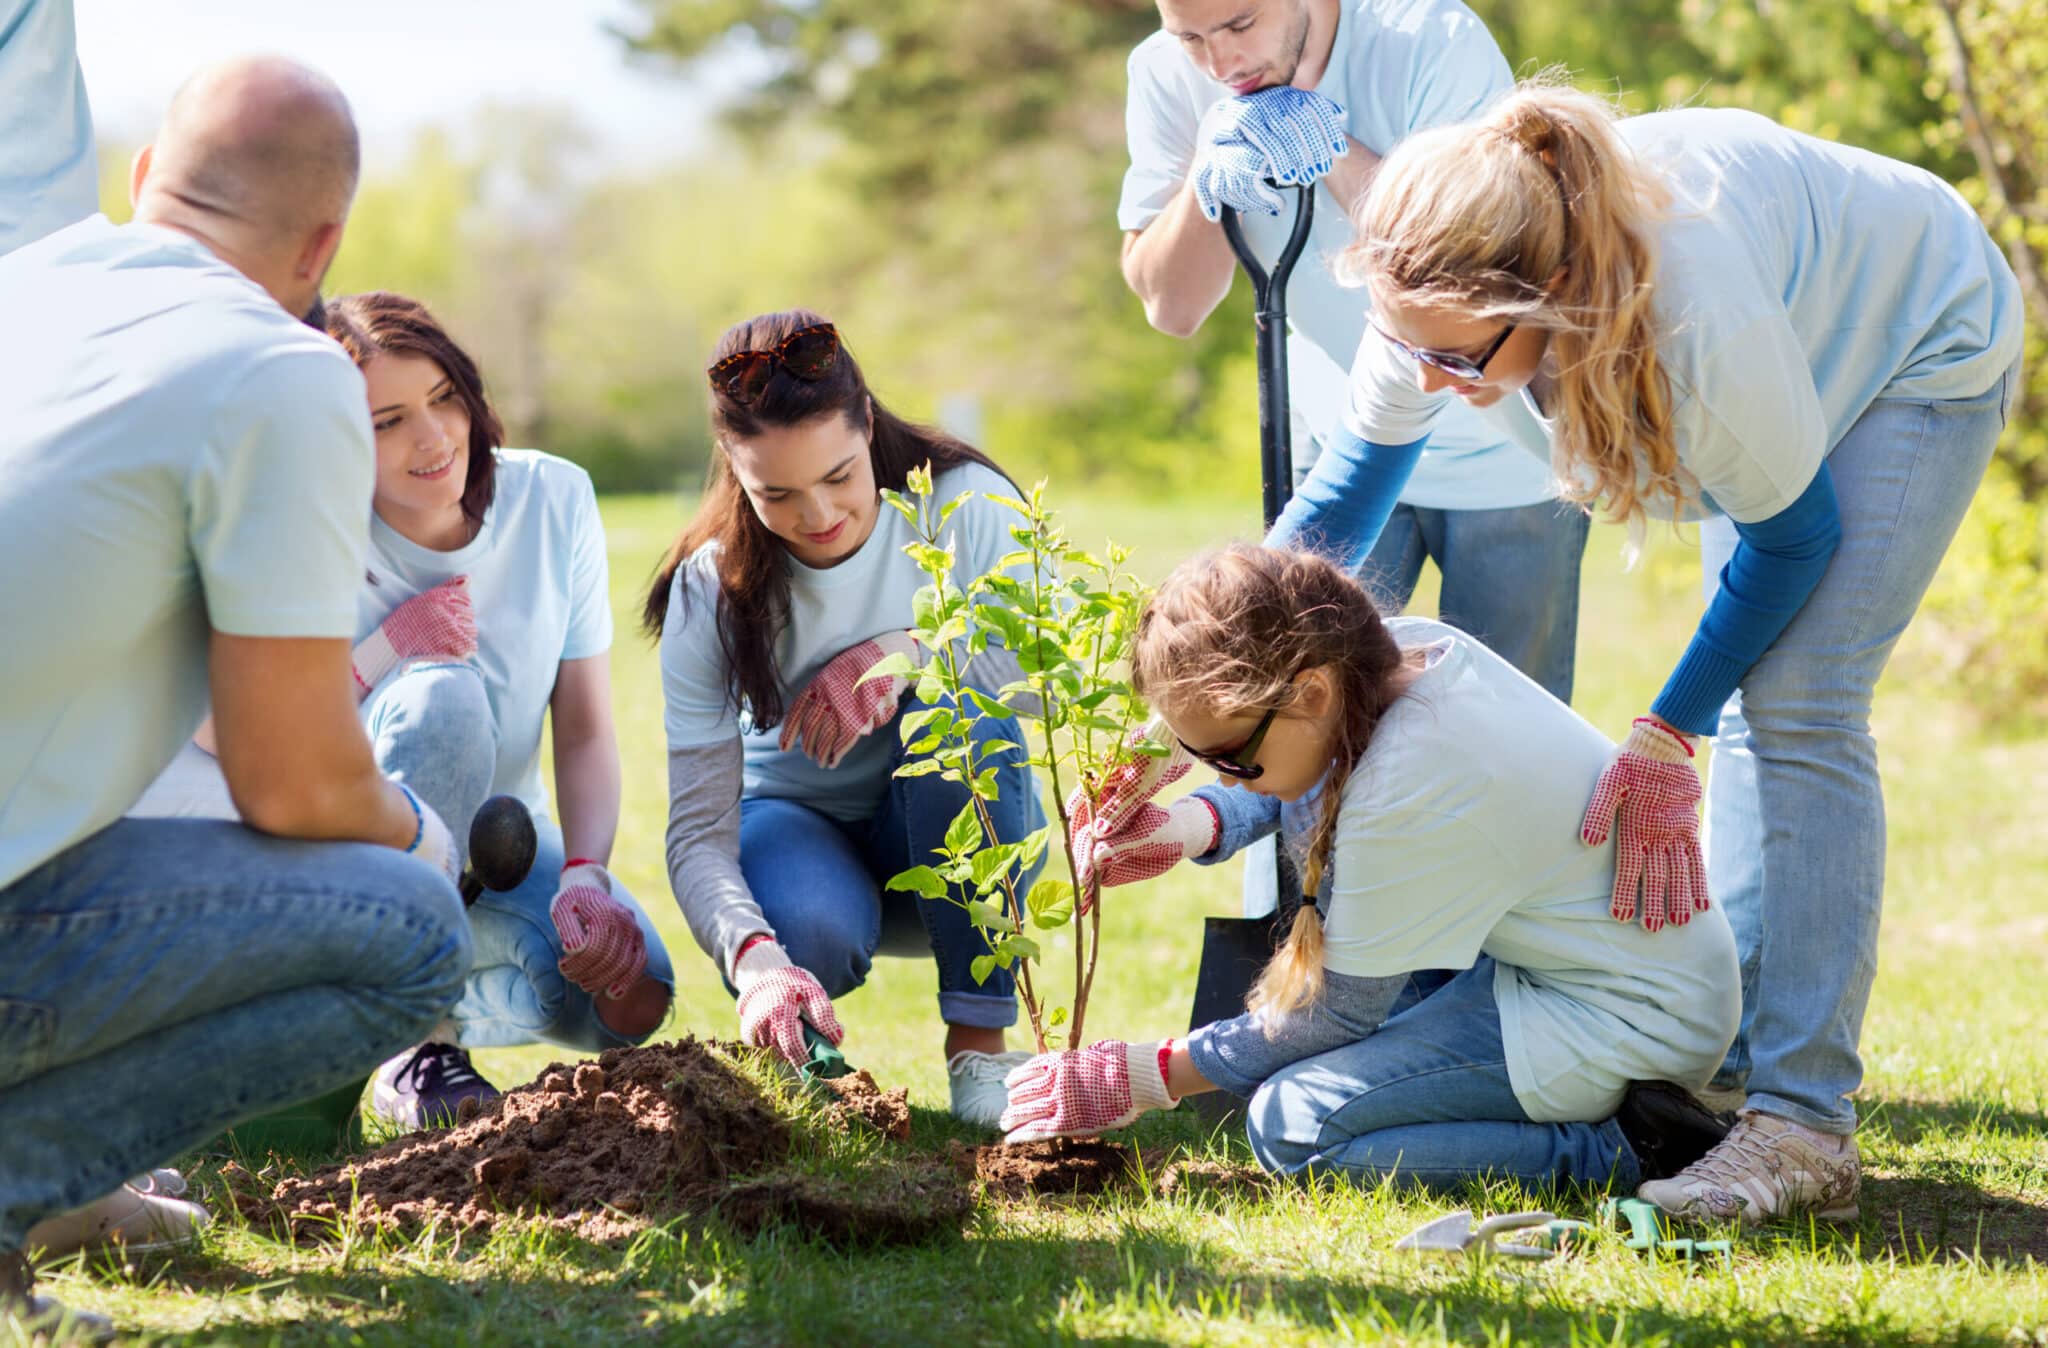 People planting a tree in healthy soil